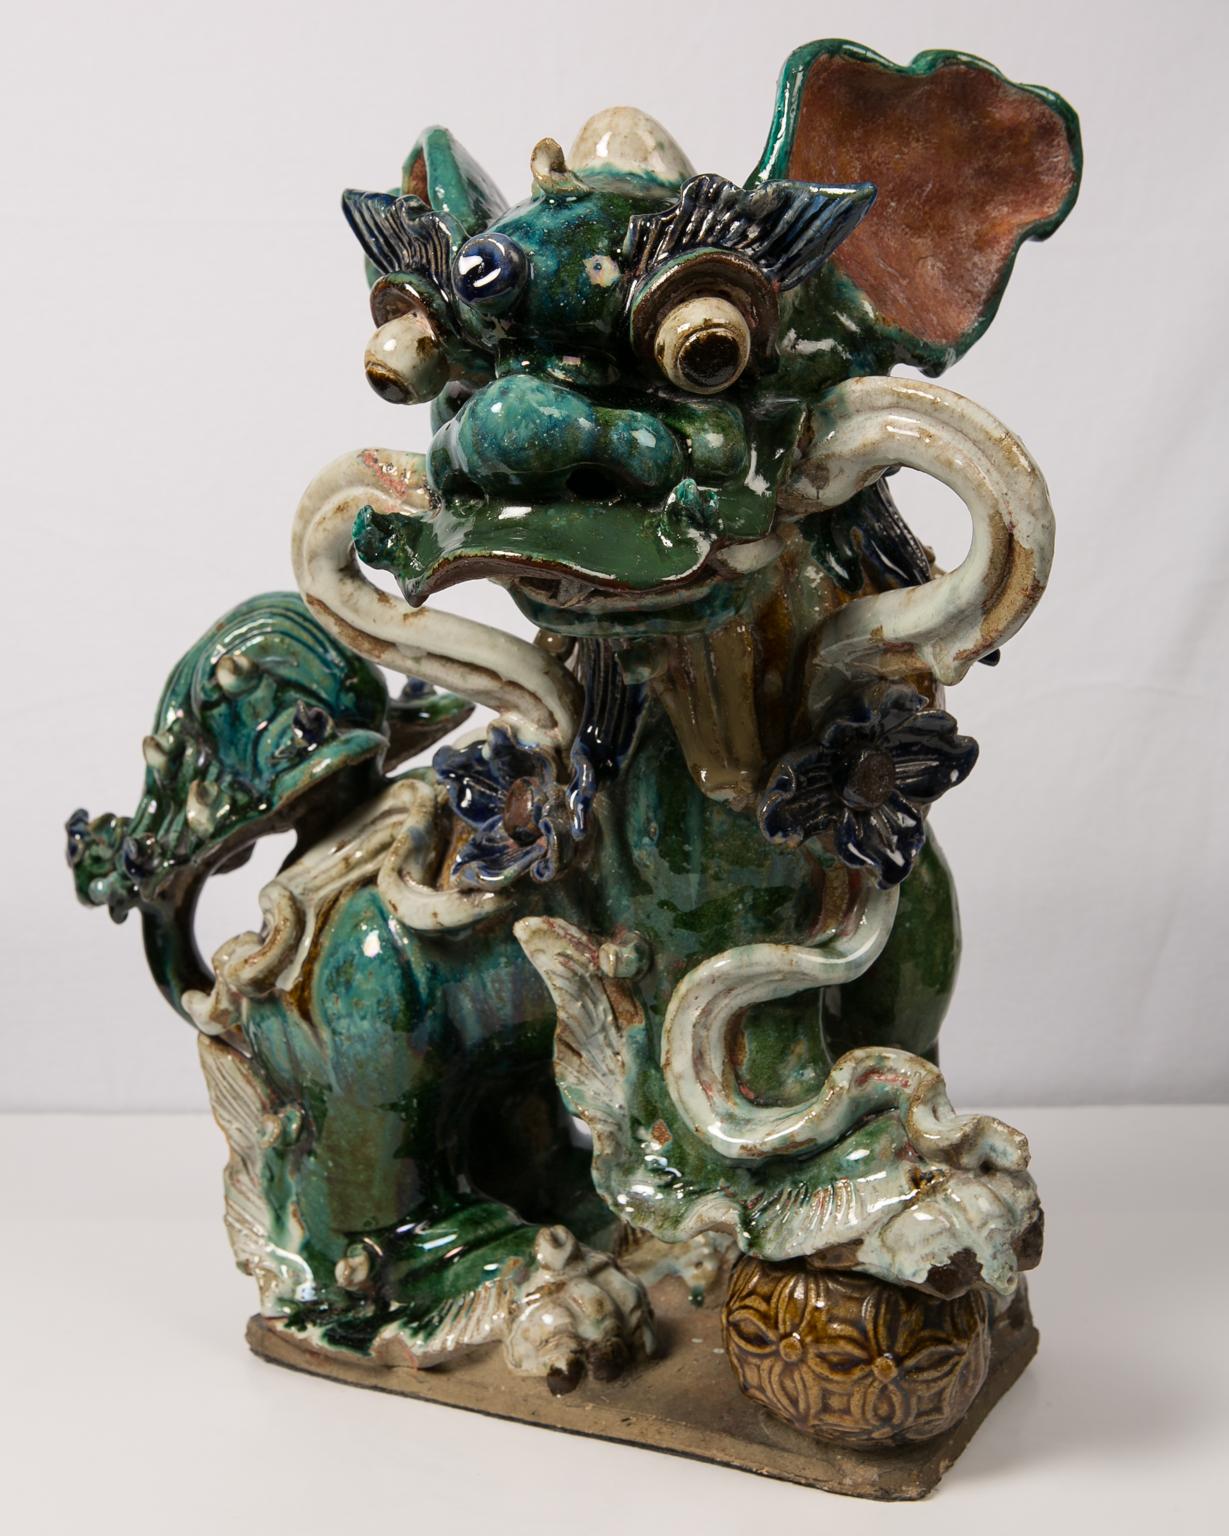 A pair of flamboyant Chinese lion dogs, also called Fu dogs, fully covered in rich glazes of green, turquoise, blue, brown, and white. This wonderful pair of sculptures is dated to the late-Qing period, from the early 20th century. Skilfully and